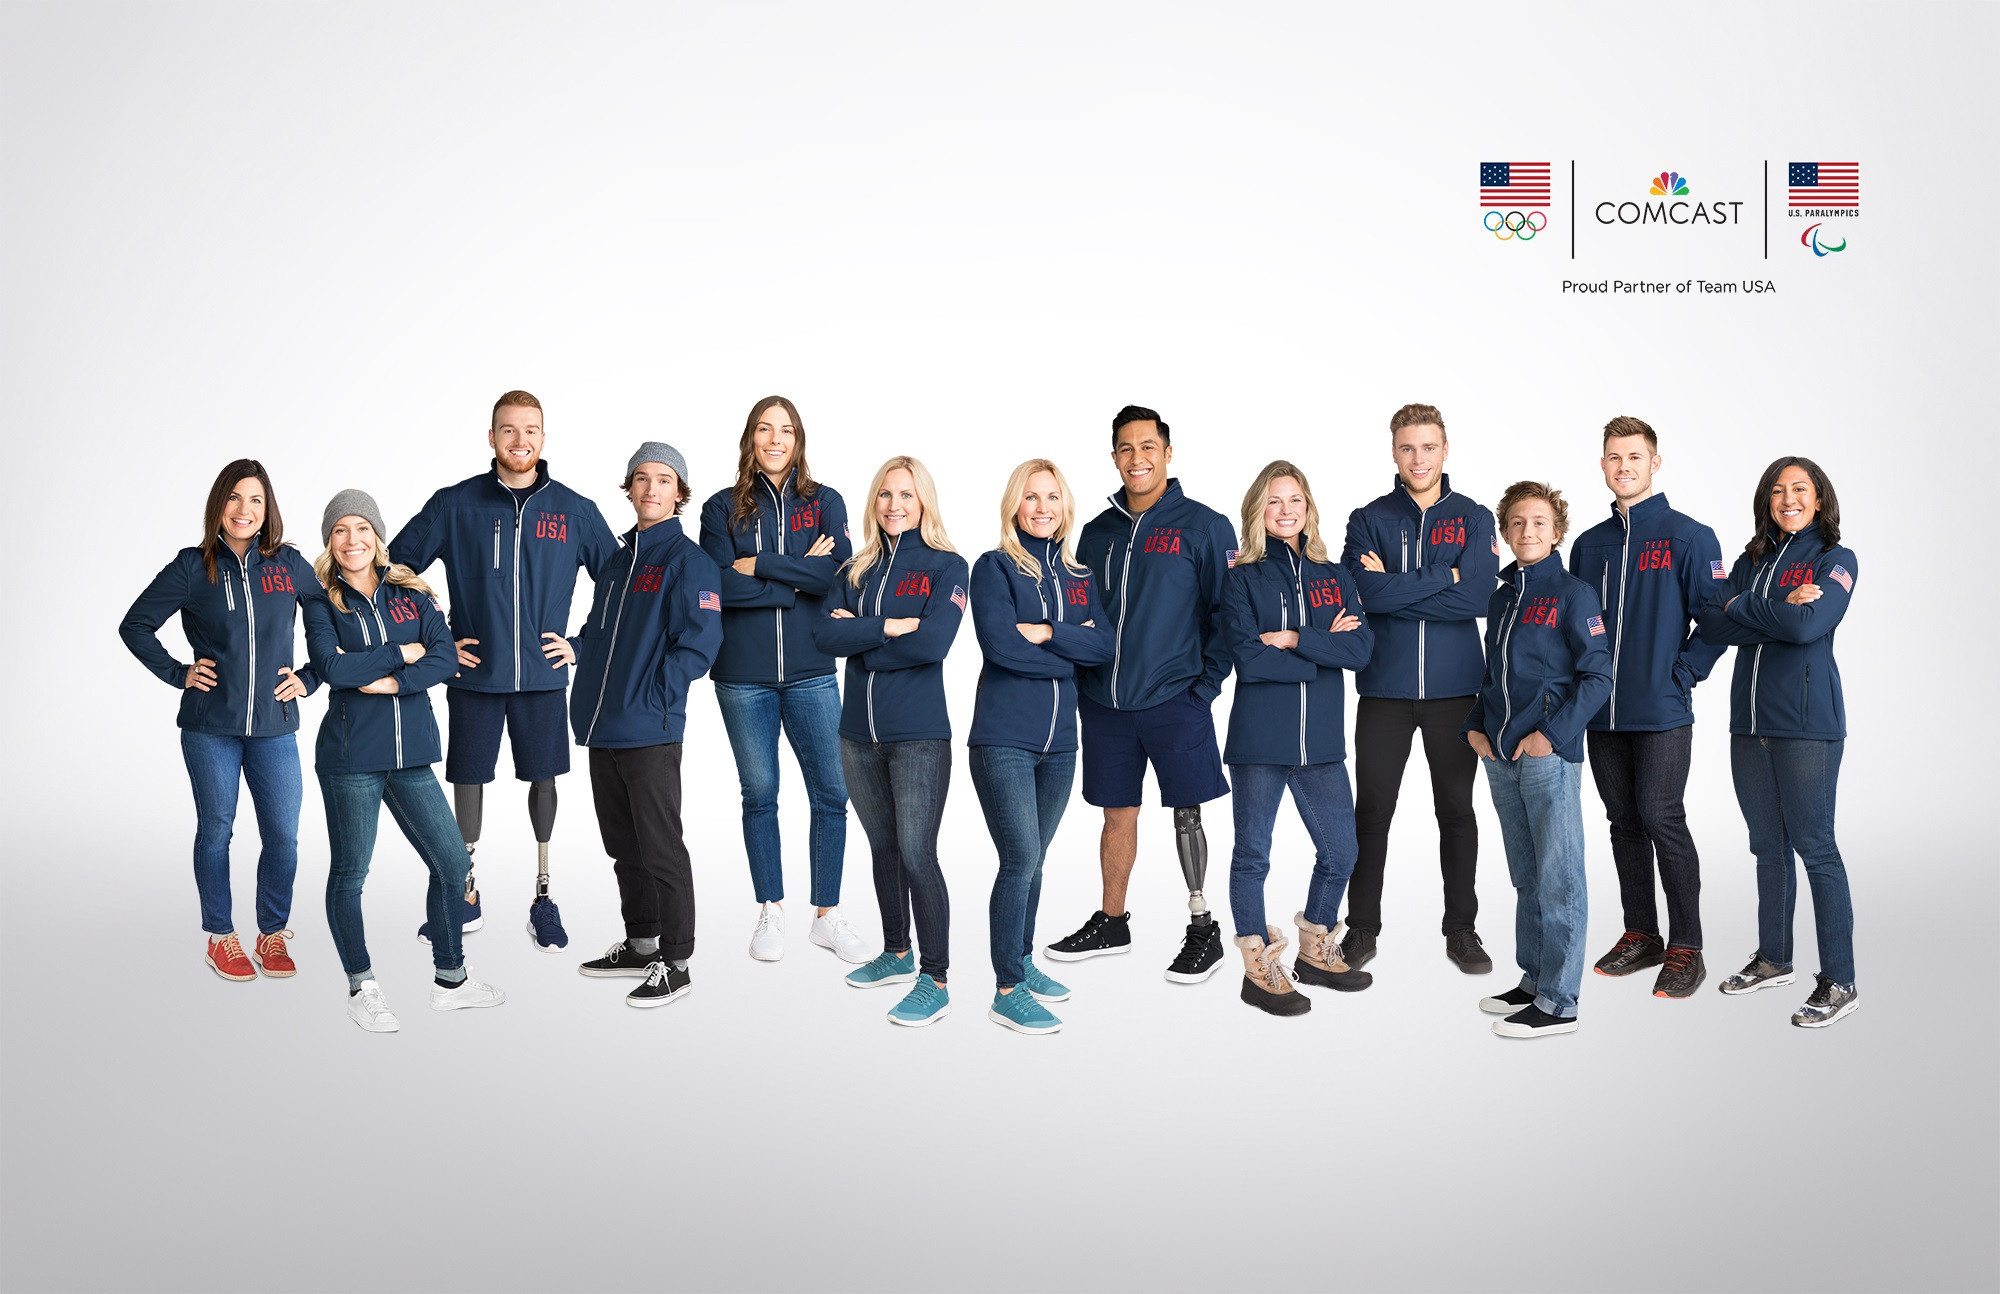 Comcast announce support of 13 Team USA athletes before Pyeongchang 2018